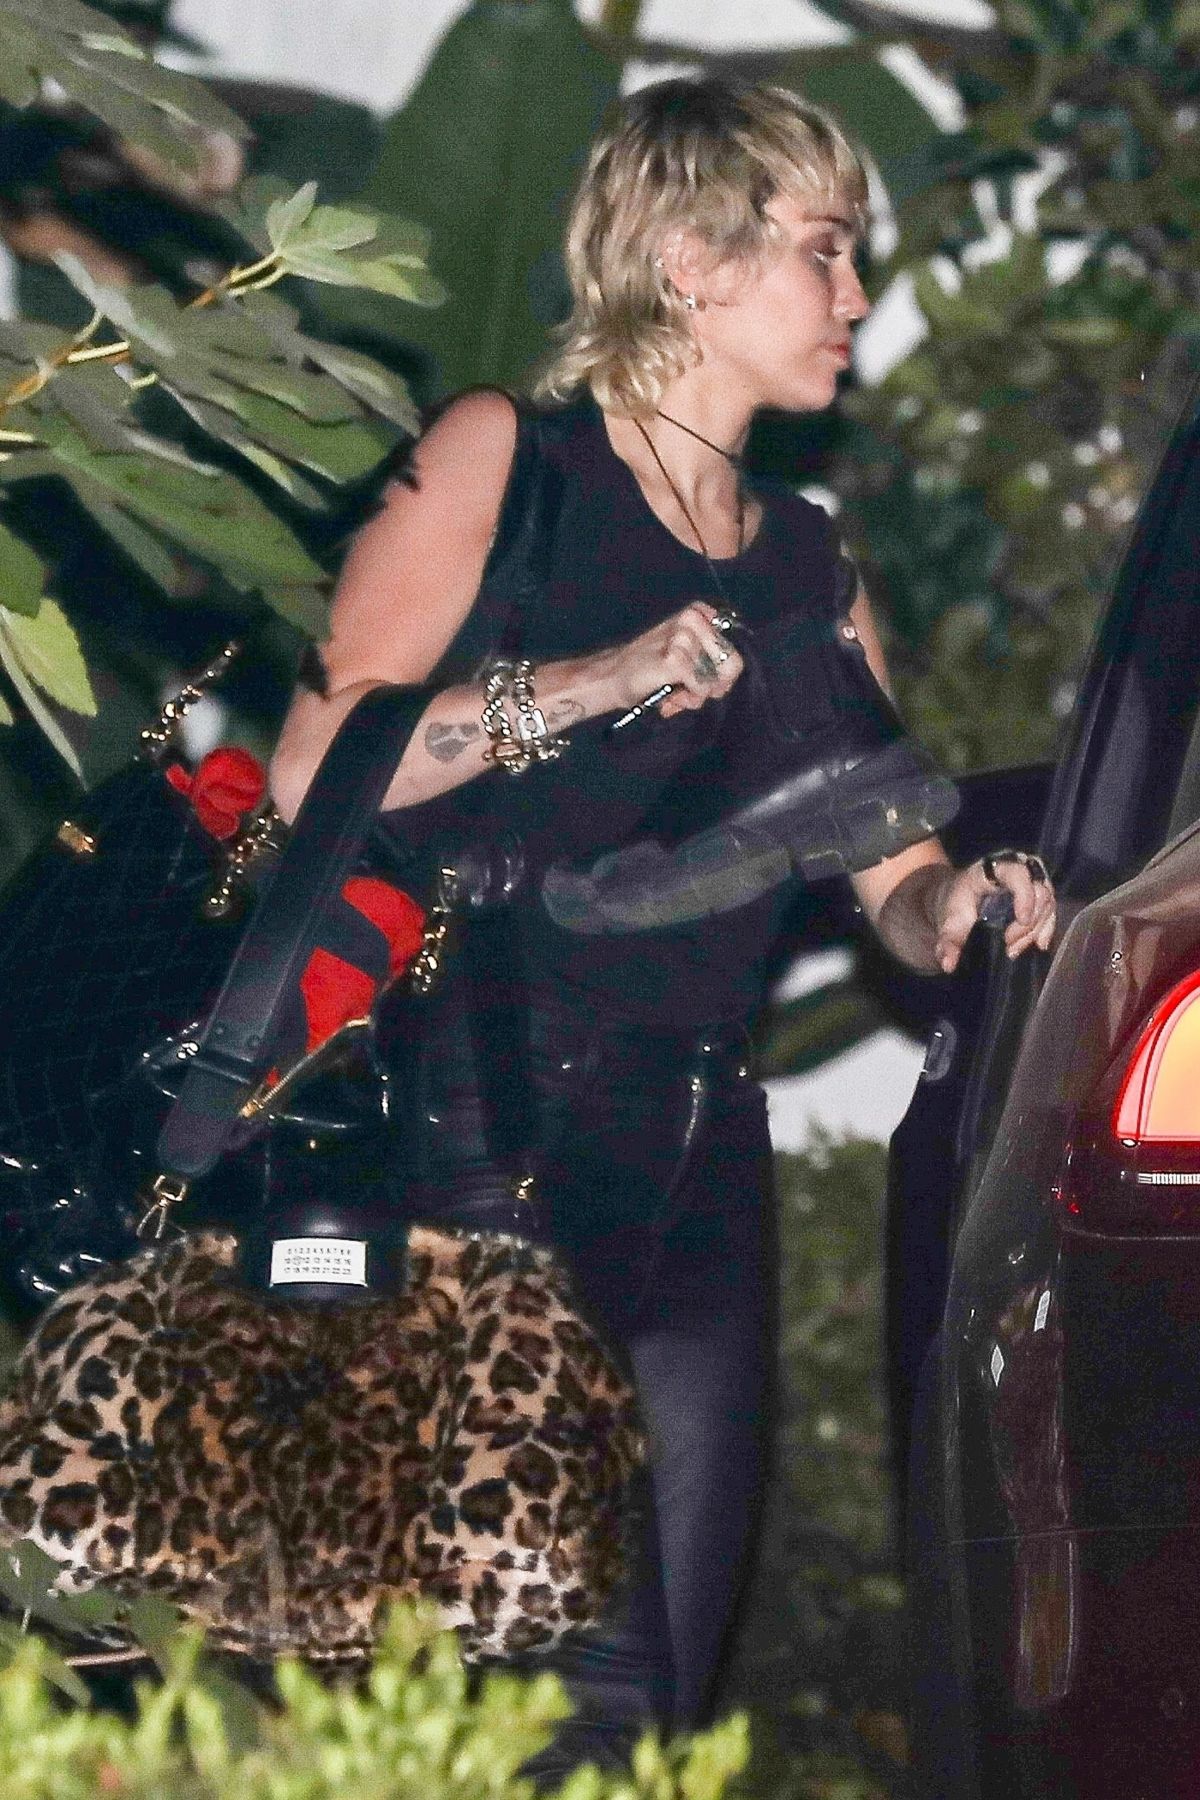 miley-cyrus-leaves-a-photoshoot-in-beverly-hills-09-15-2020-9.jpg